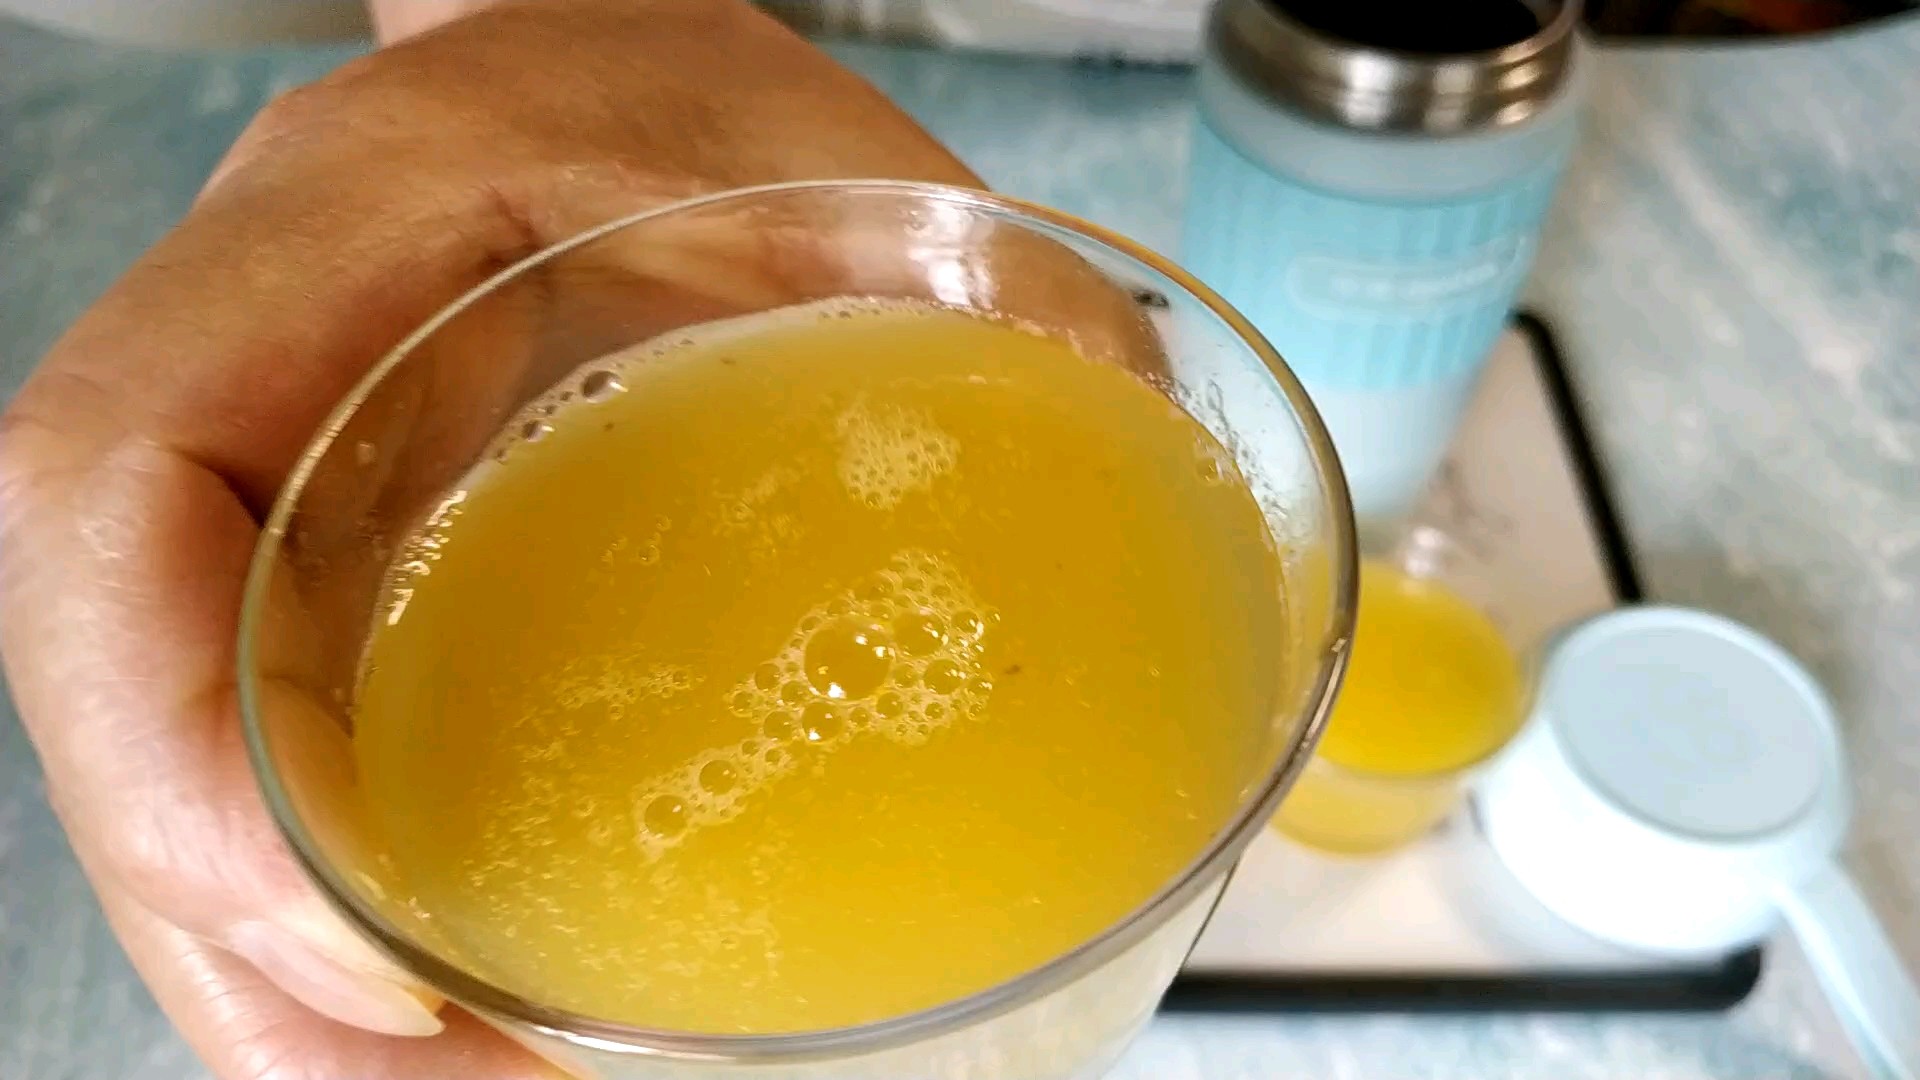 Hot Weather is Here, Fresh Juice is Squeezed by Yourself recipe